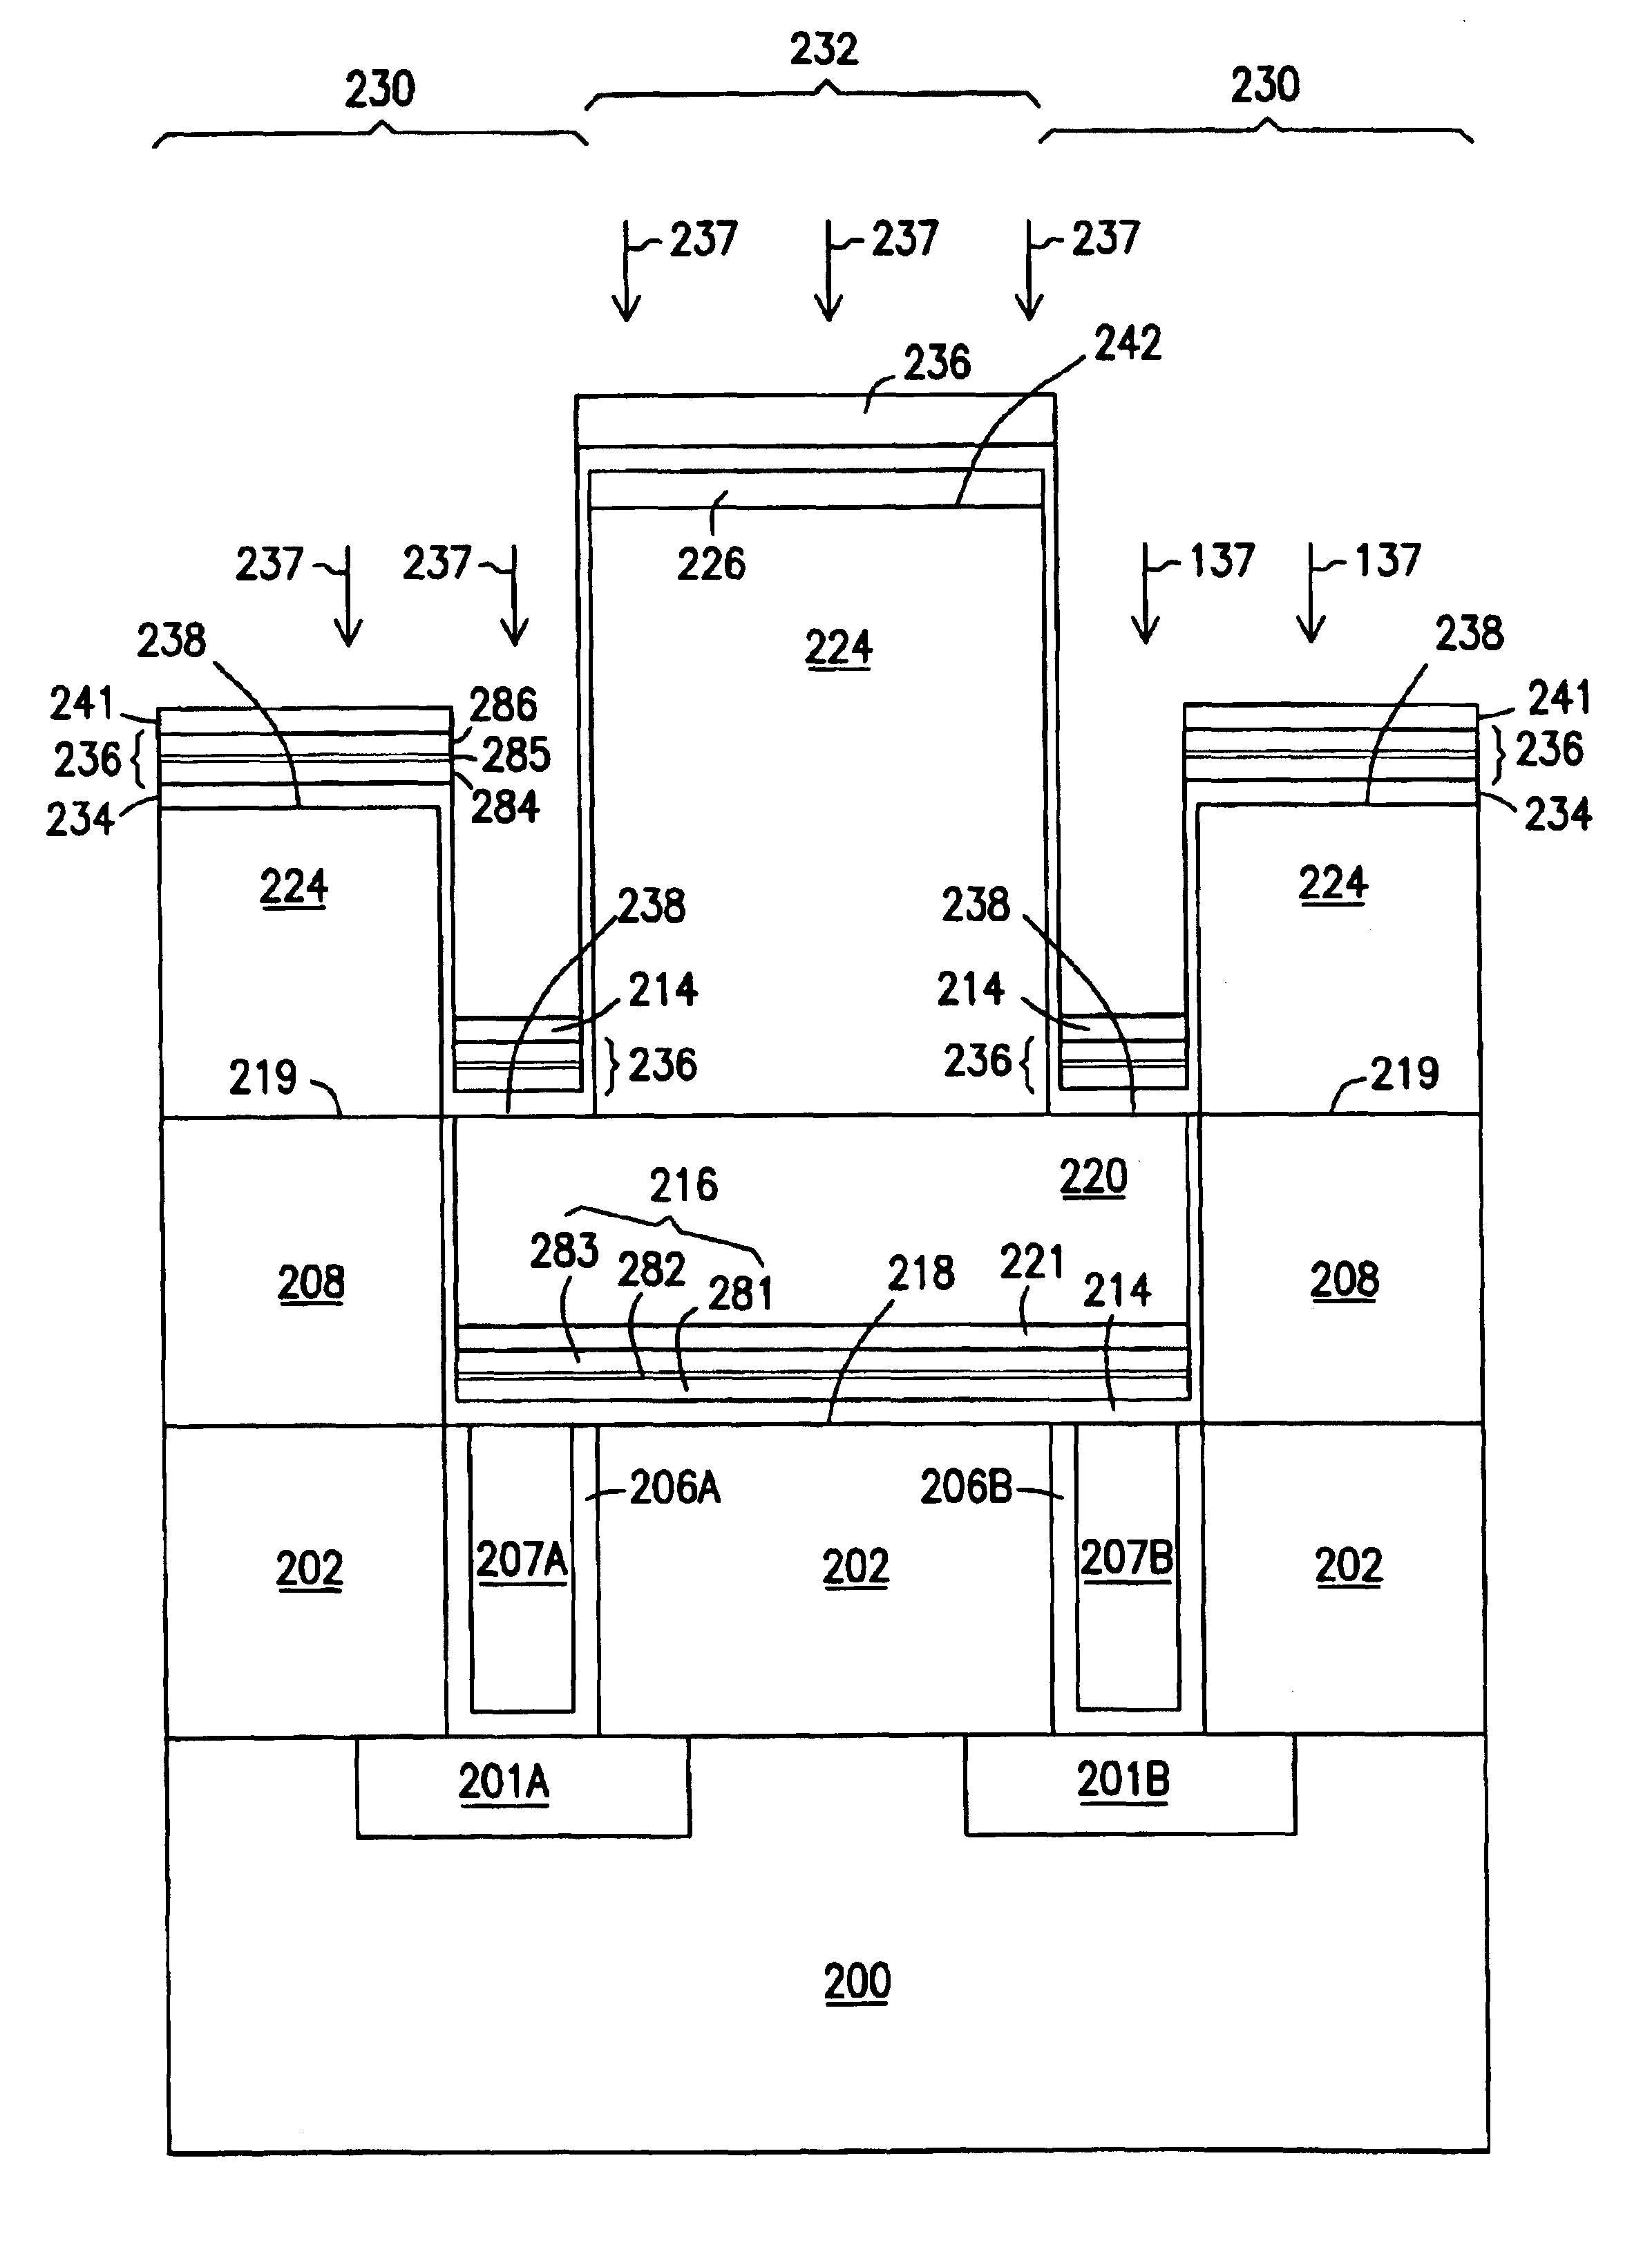 Integrated circuit and seed layers